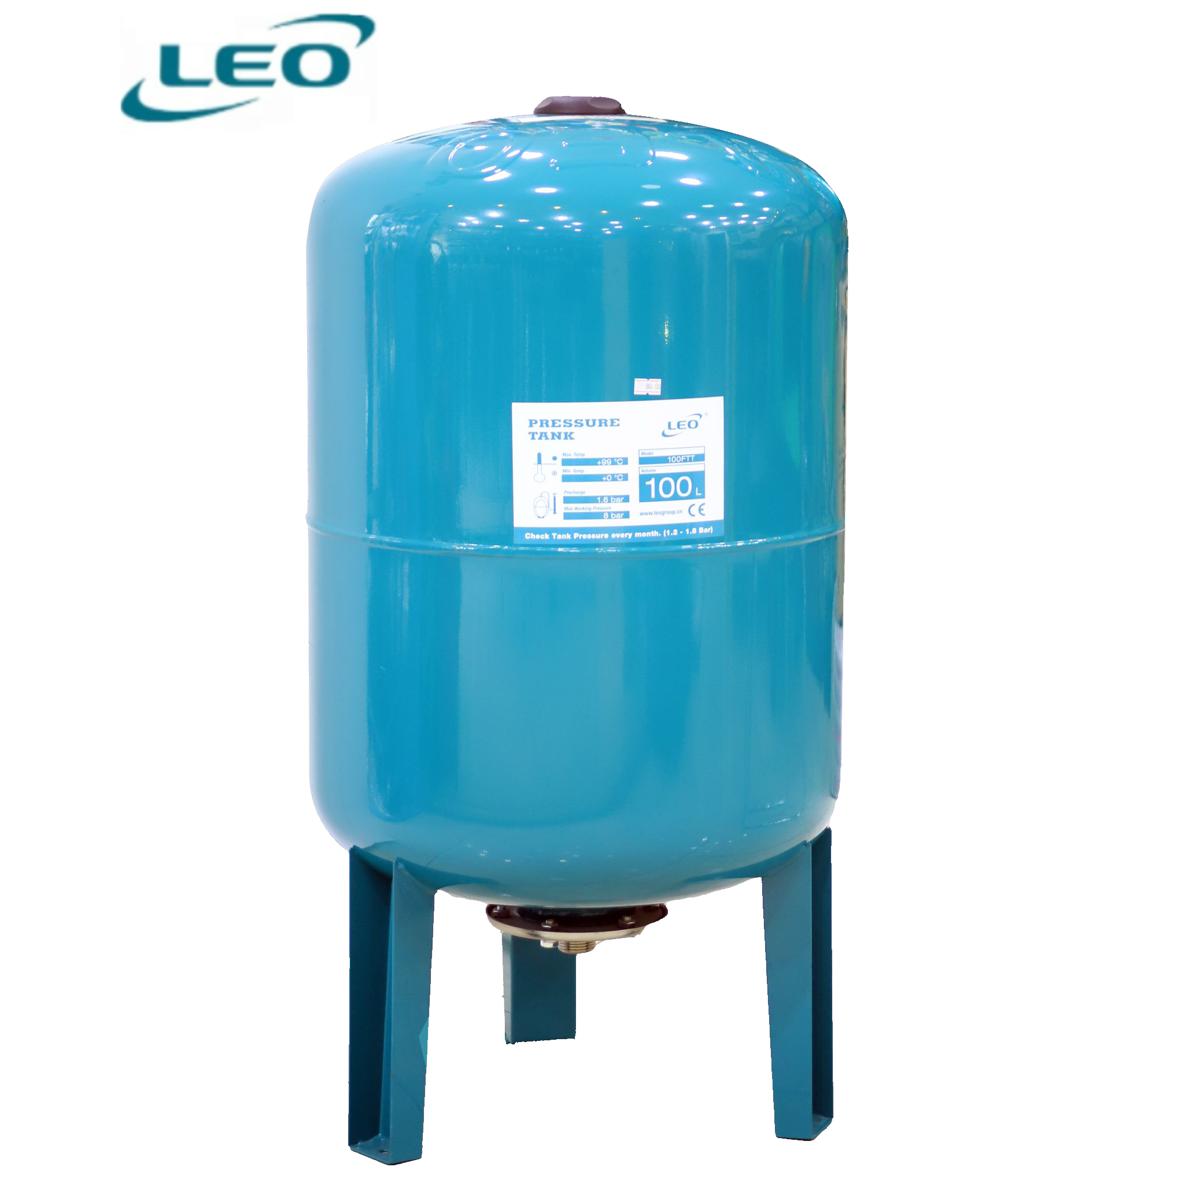 LEO - 100FTTI -  100 LTR PRESSURE TANK Vertical FOR Water Pump ( TANK ONLY )